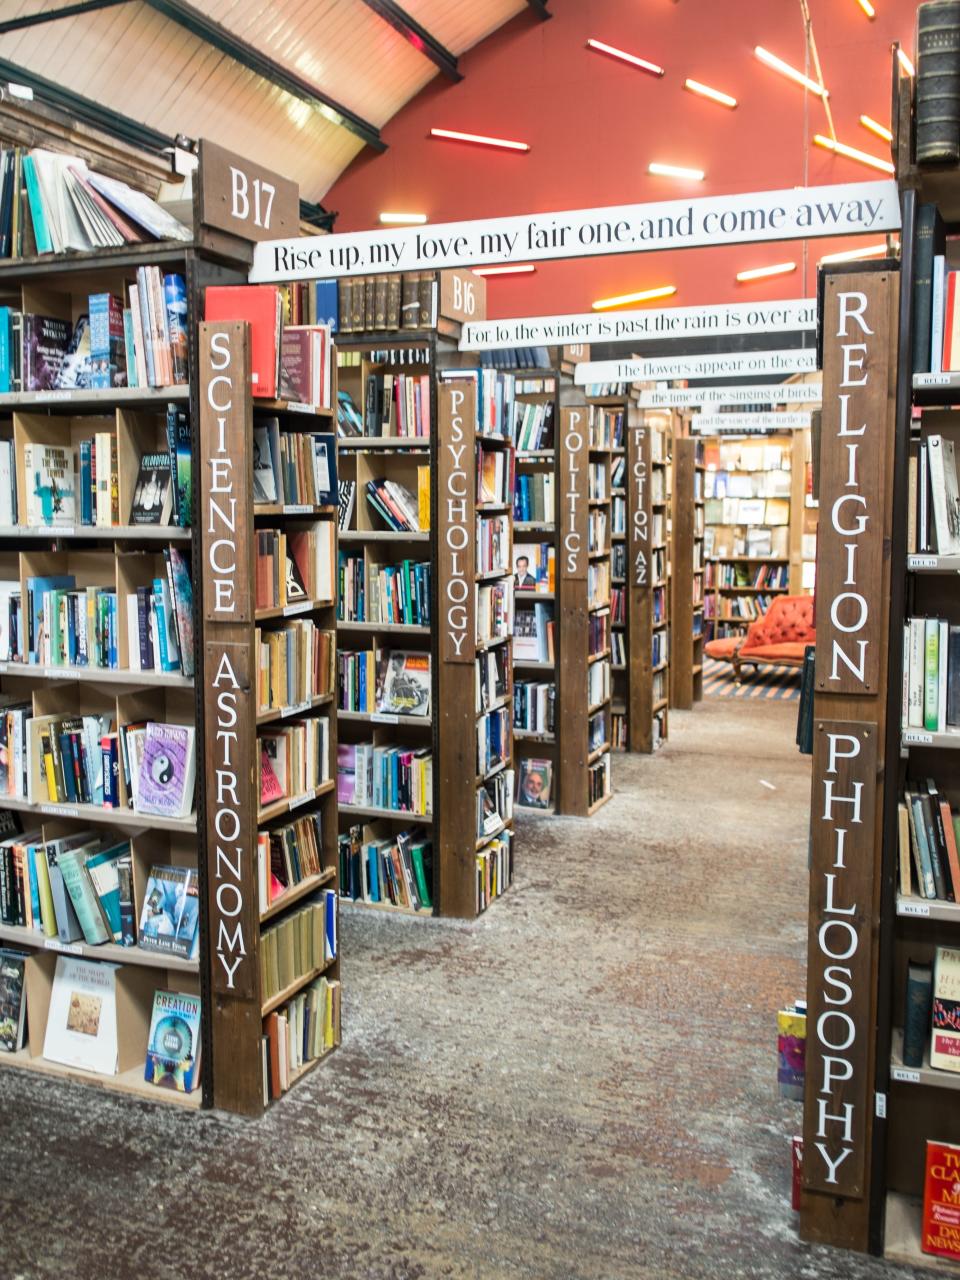 Inside Barter Books, which is located in a former train station.